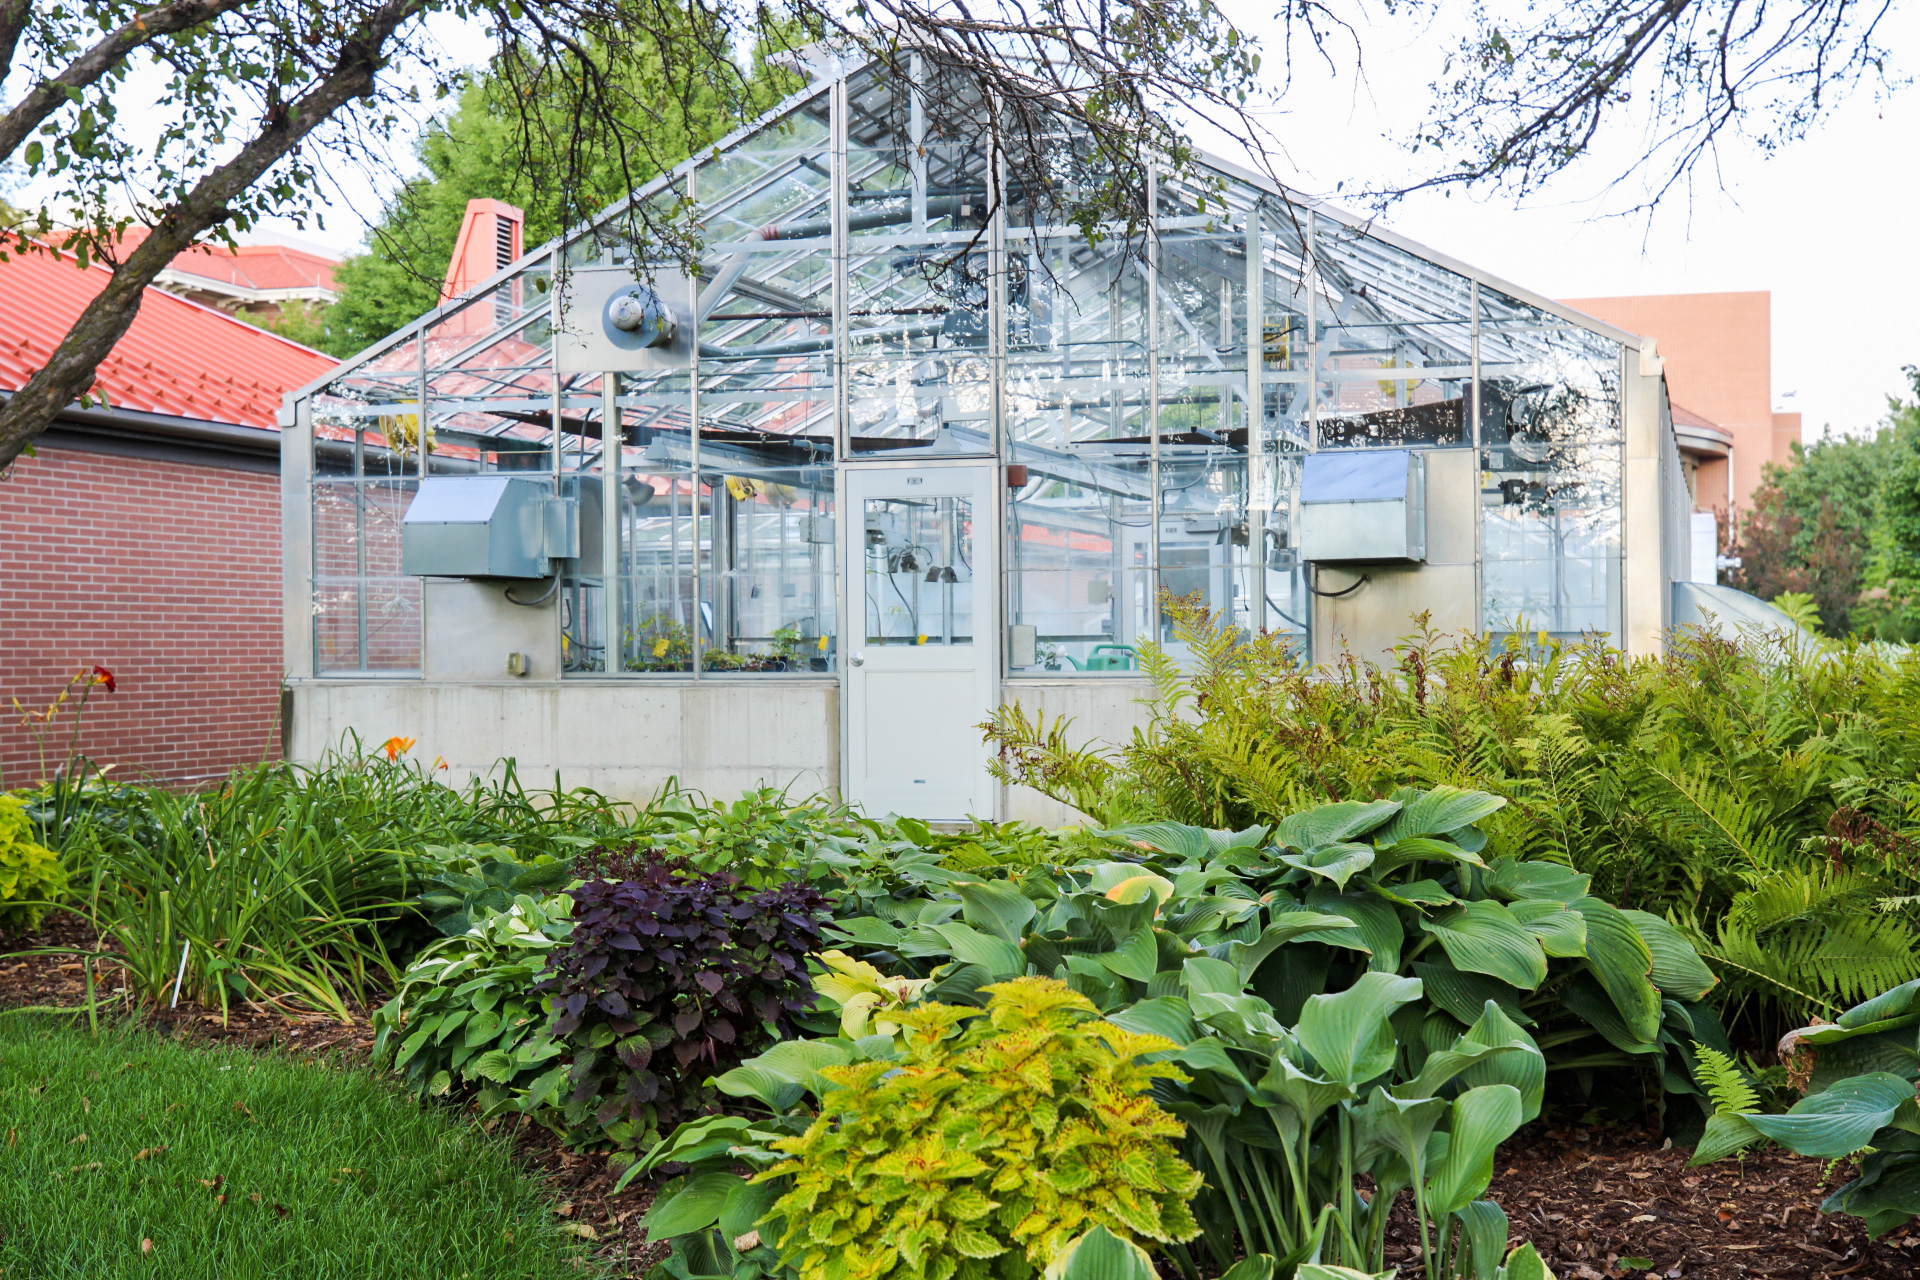 The new Botanical Center Fund for Excellence will help support student projects and equipment for the facility.